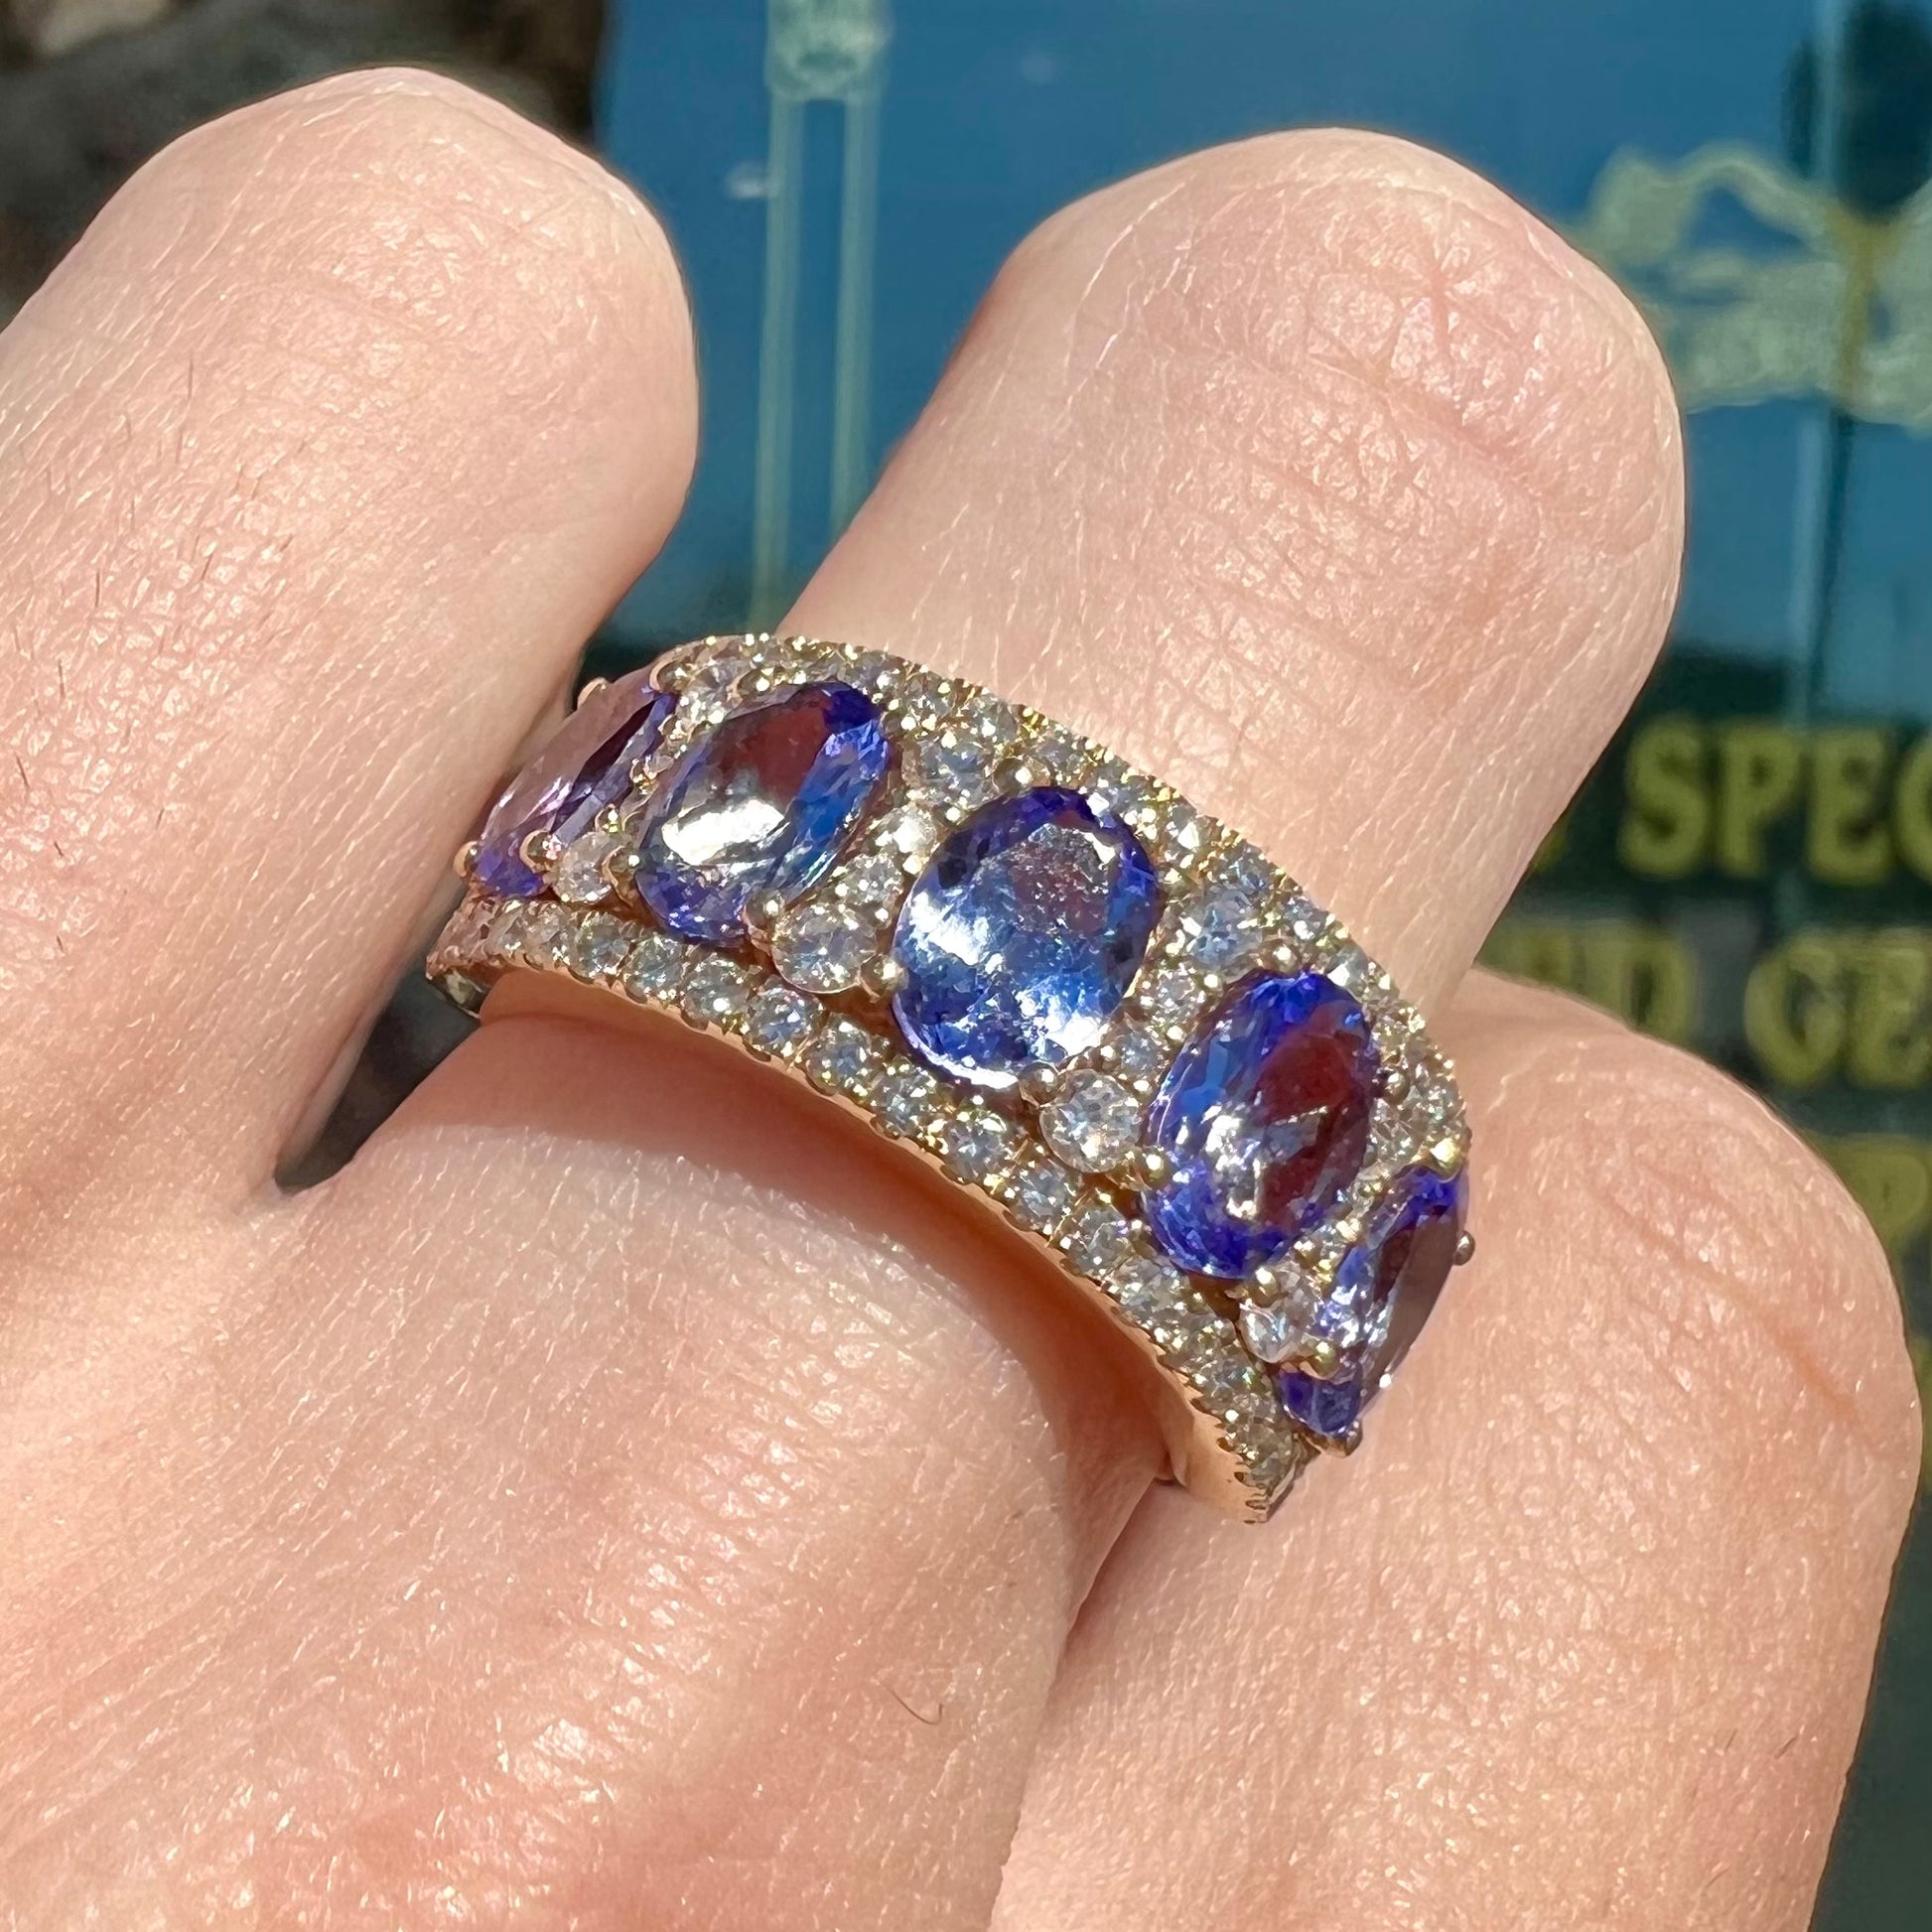 A gold and diamond ladies' band set with five oval cut tanzanite stones.